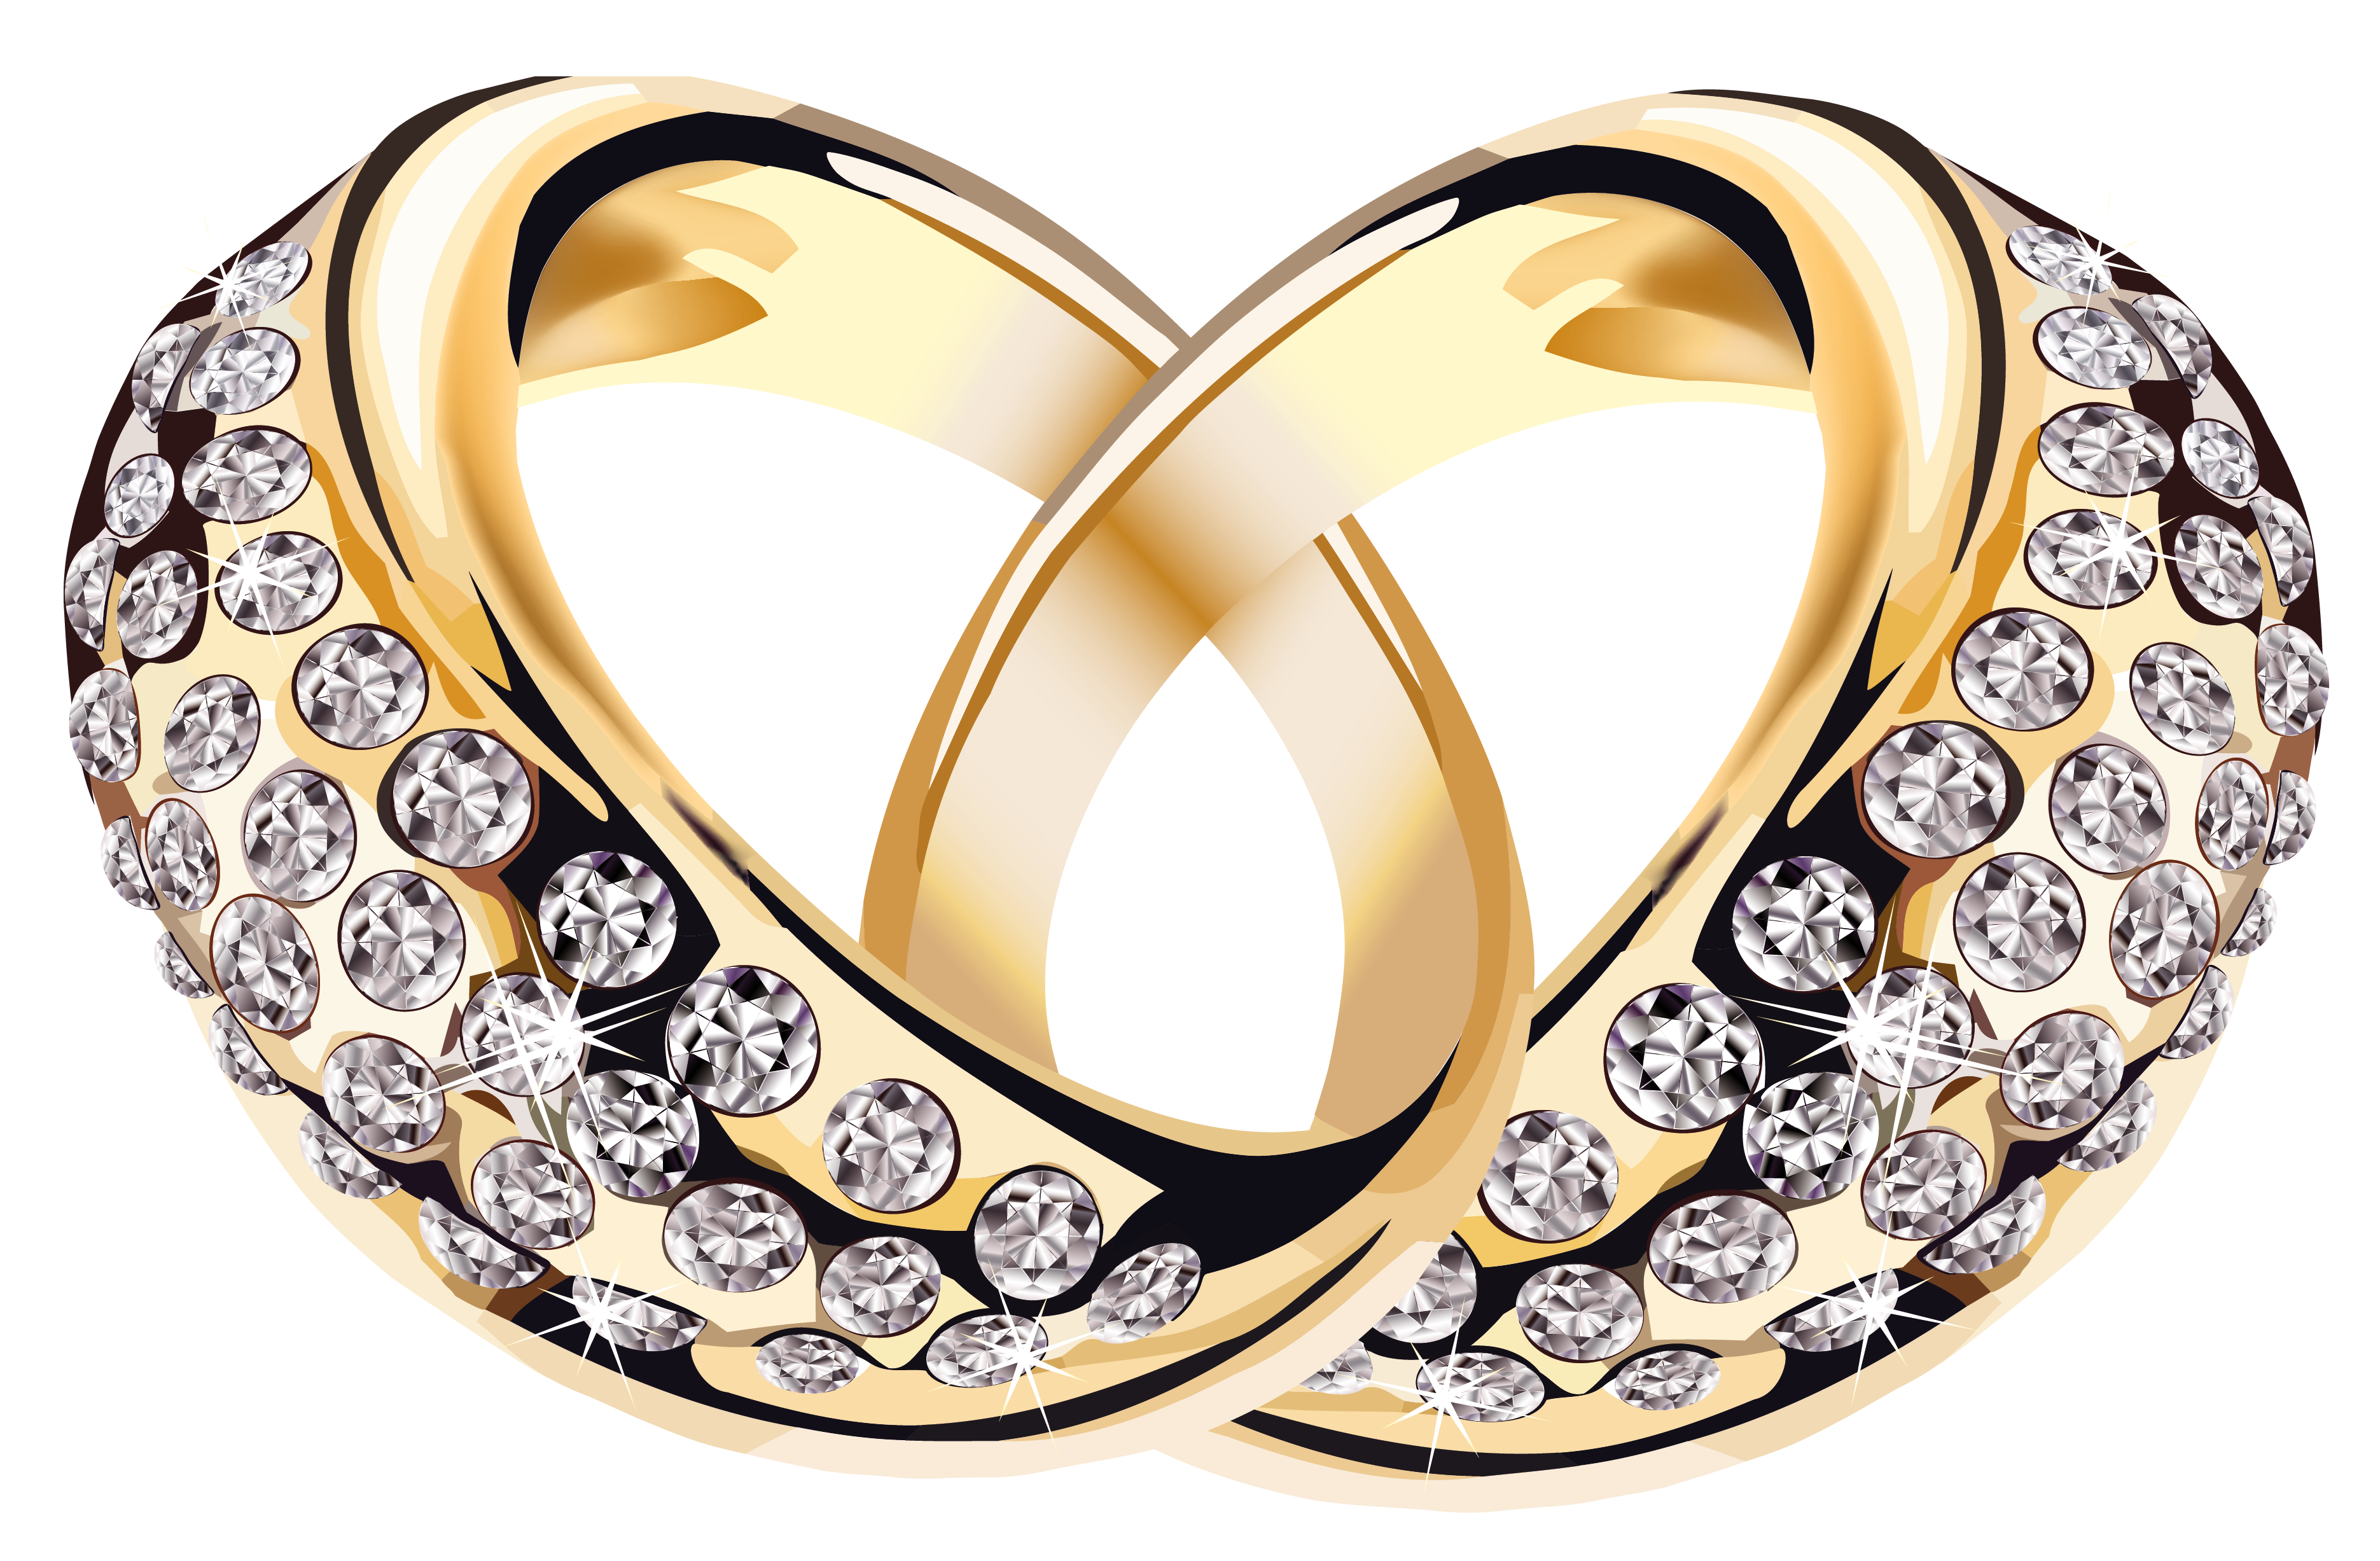 gold rings clipart - photo #45